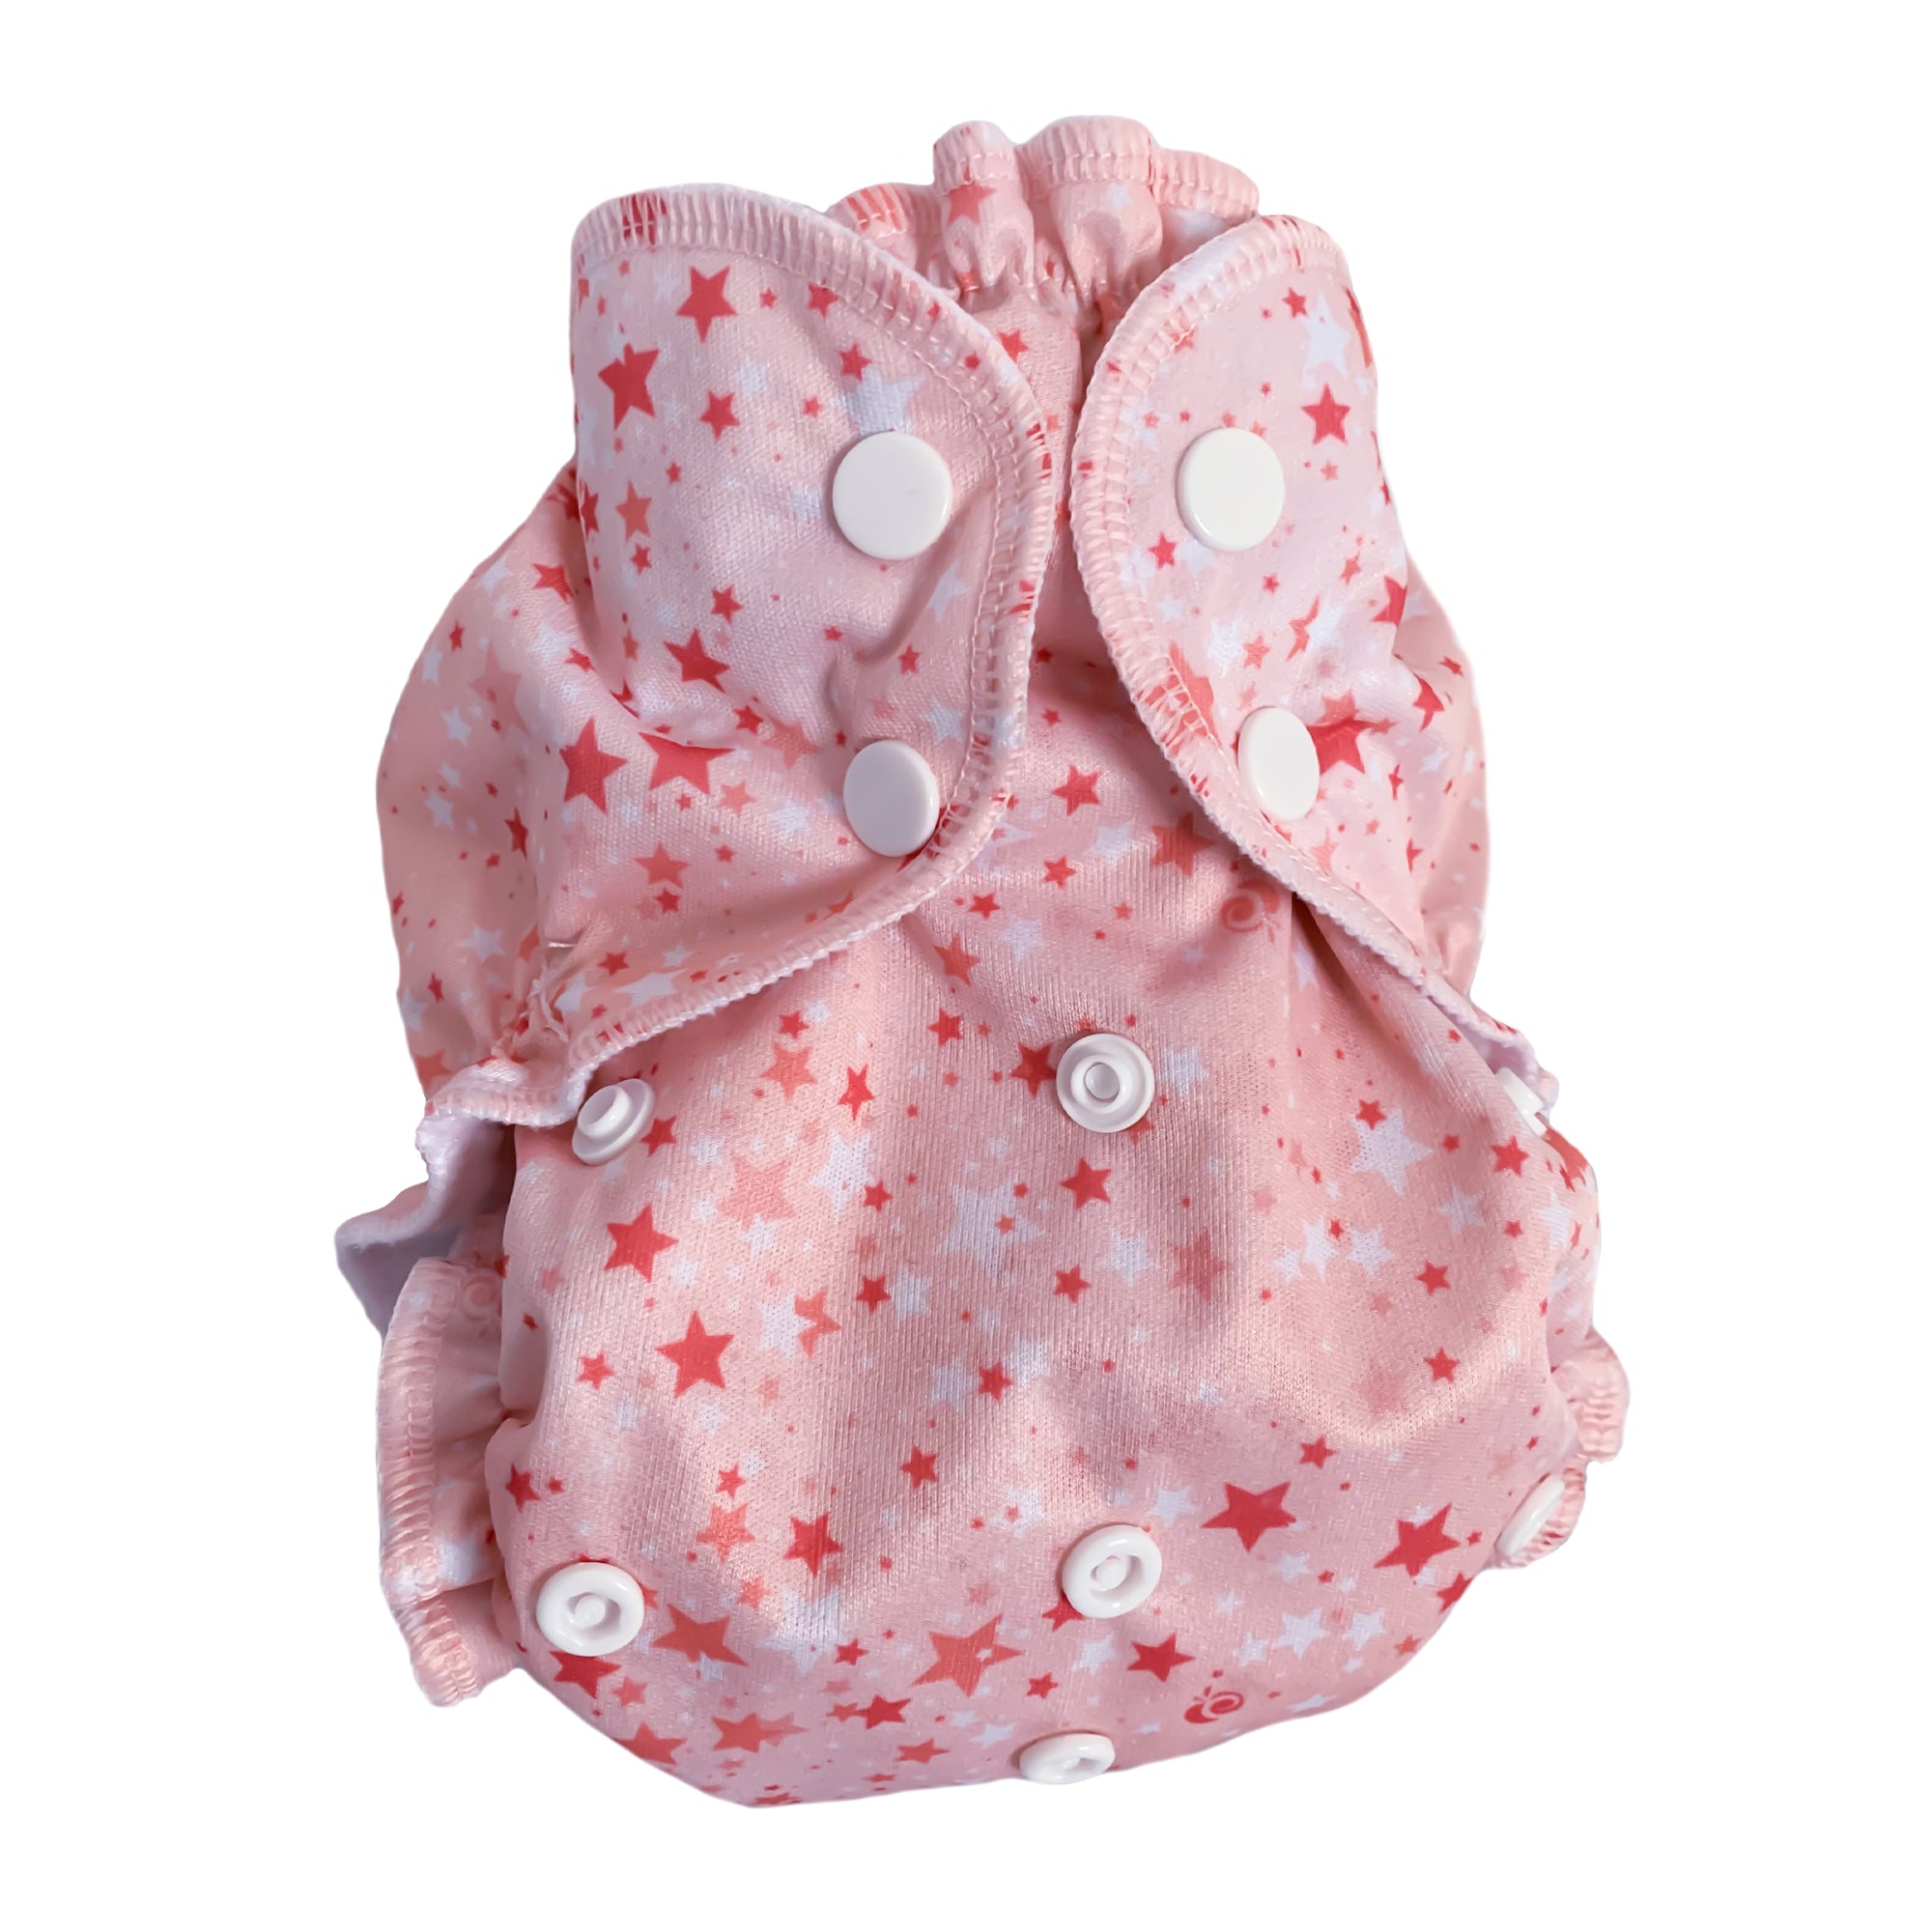 Sized Envelope Diaper Covers